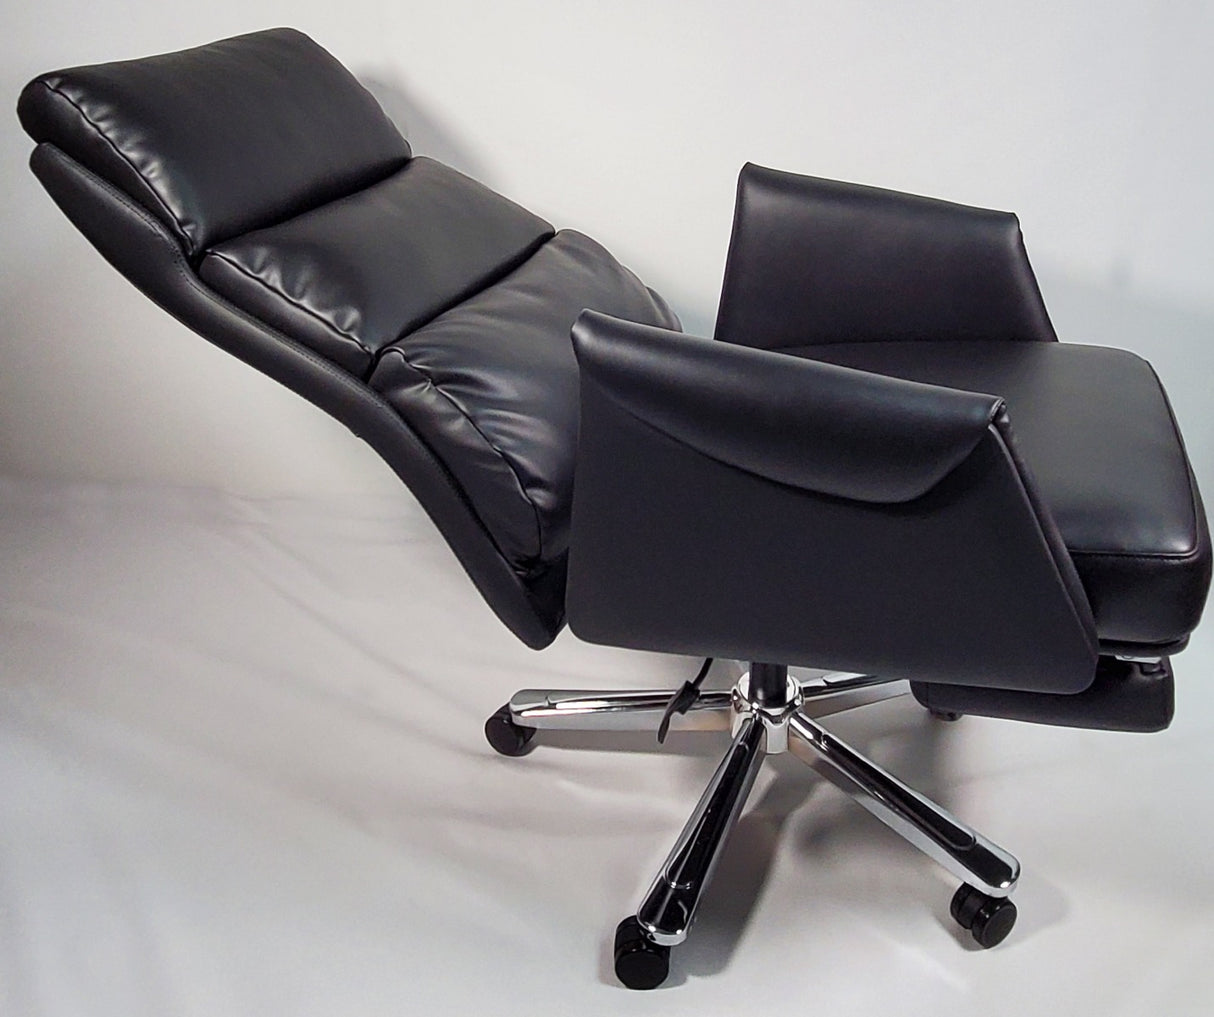 Black Leather Executive Office Chair with Built in Footrest - HB-256A